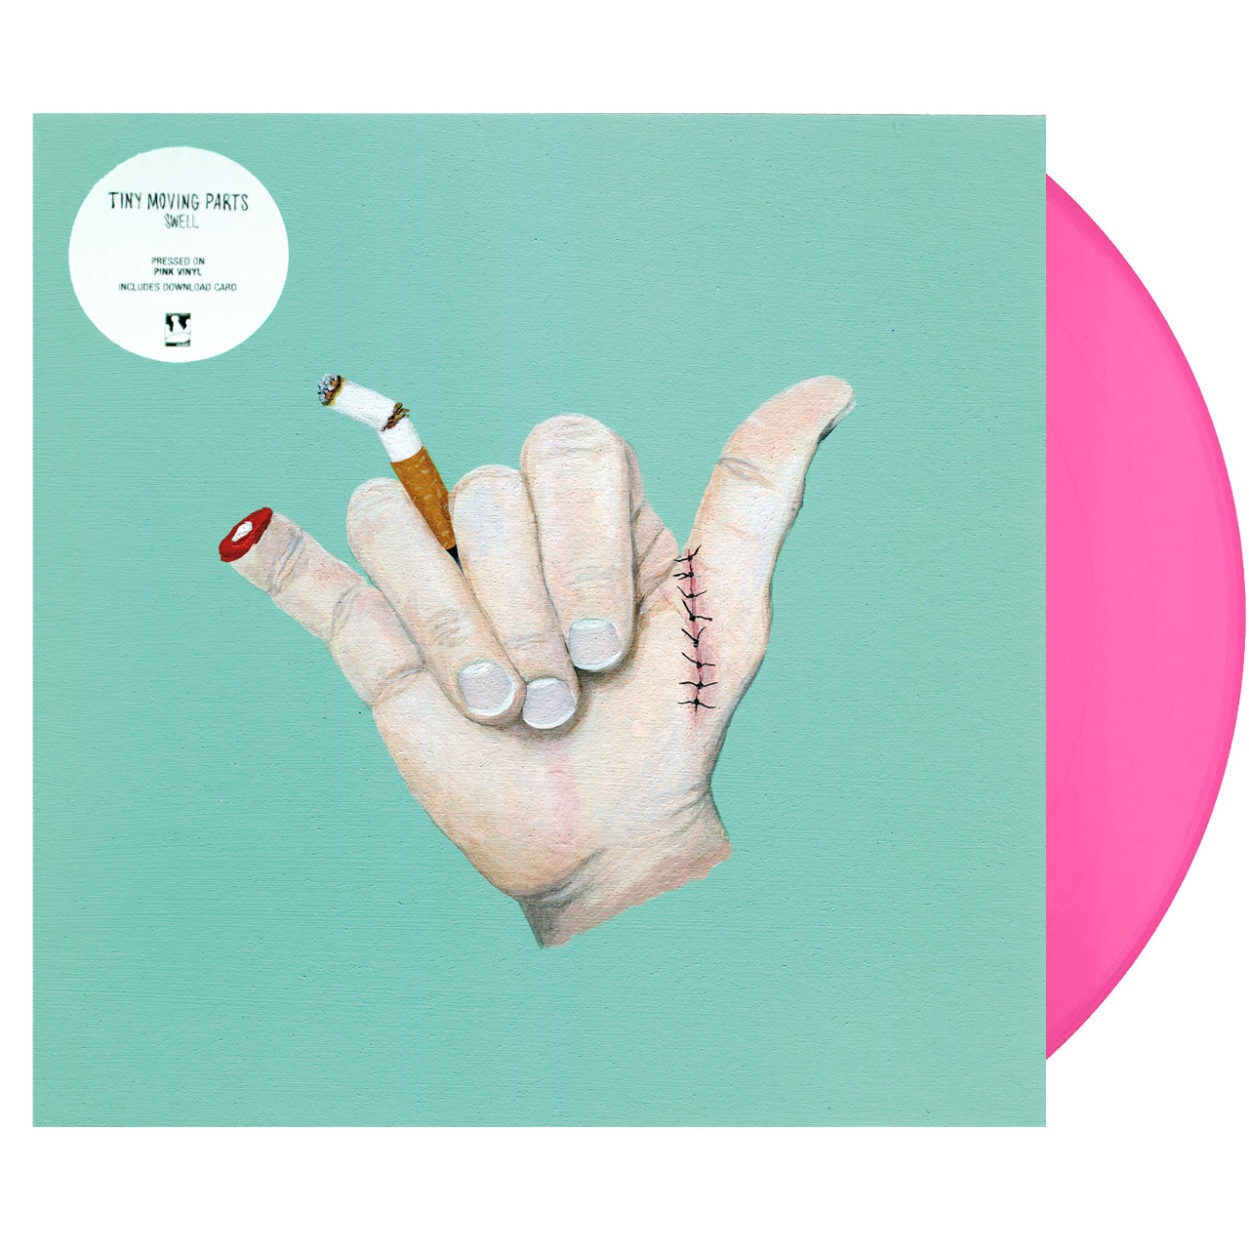 TINY MOVING PARTS Swell Pink Vinyl